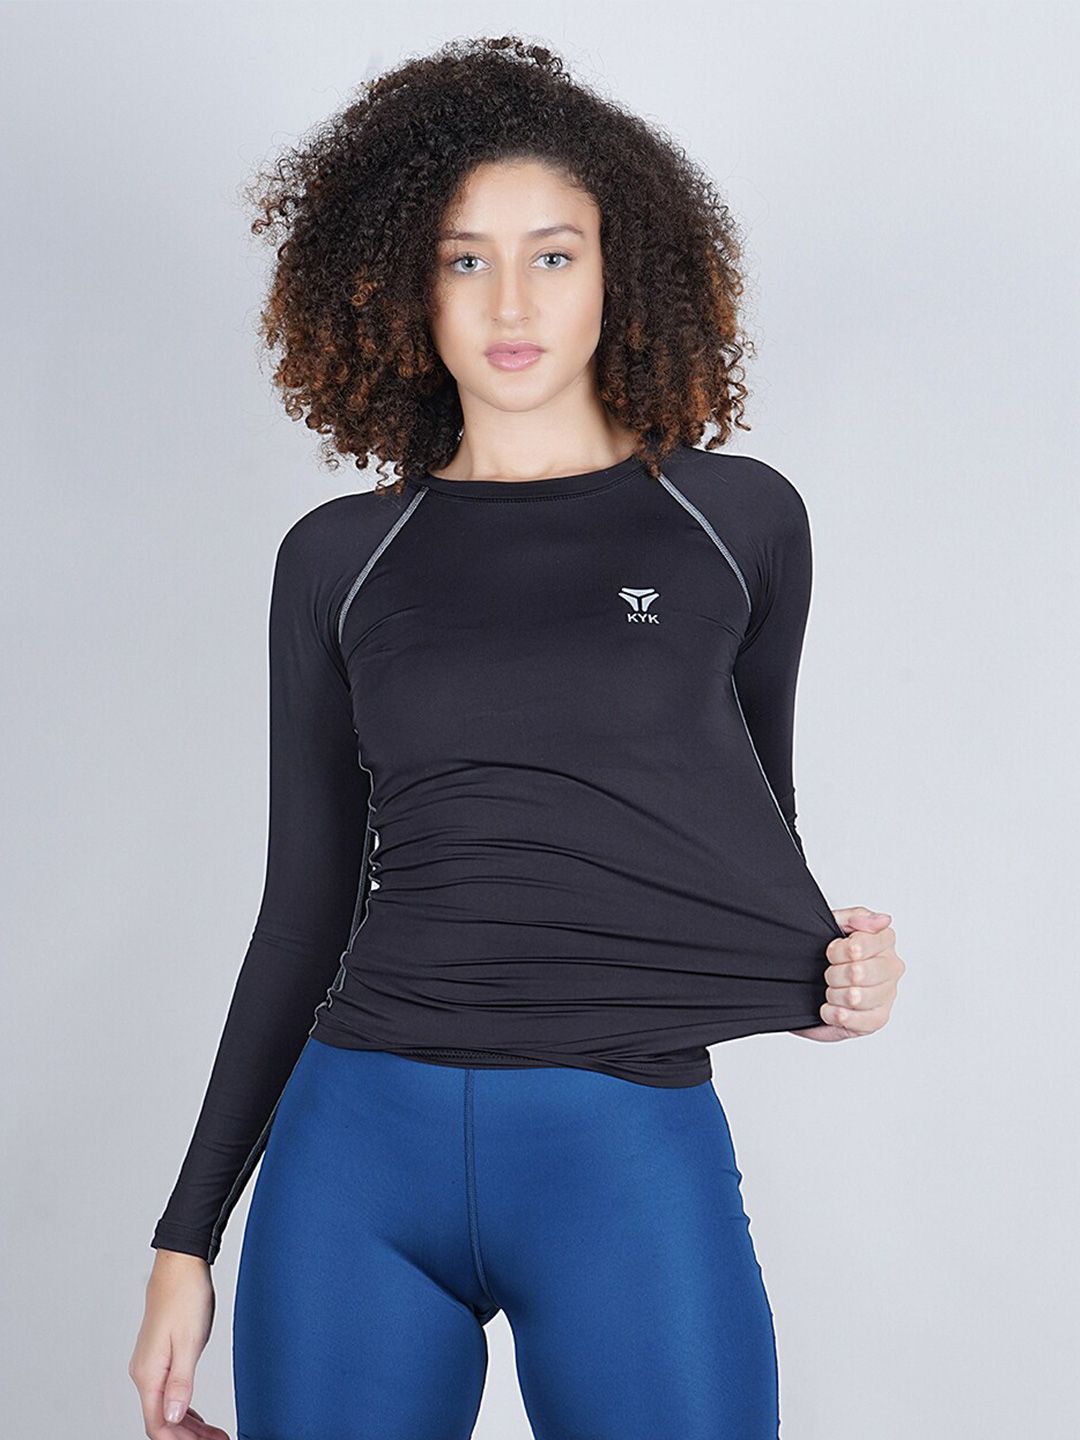 NEVER LOSE Round Neck Long Sleeves Compression Quick Dry Moisture Wicking Training T-shirt Price in India